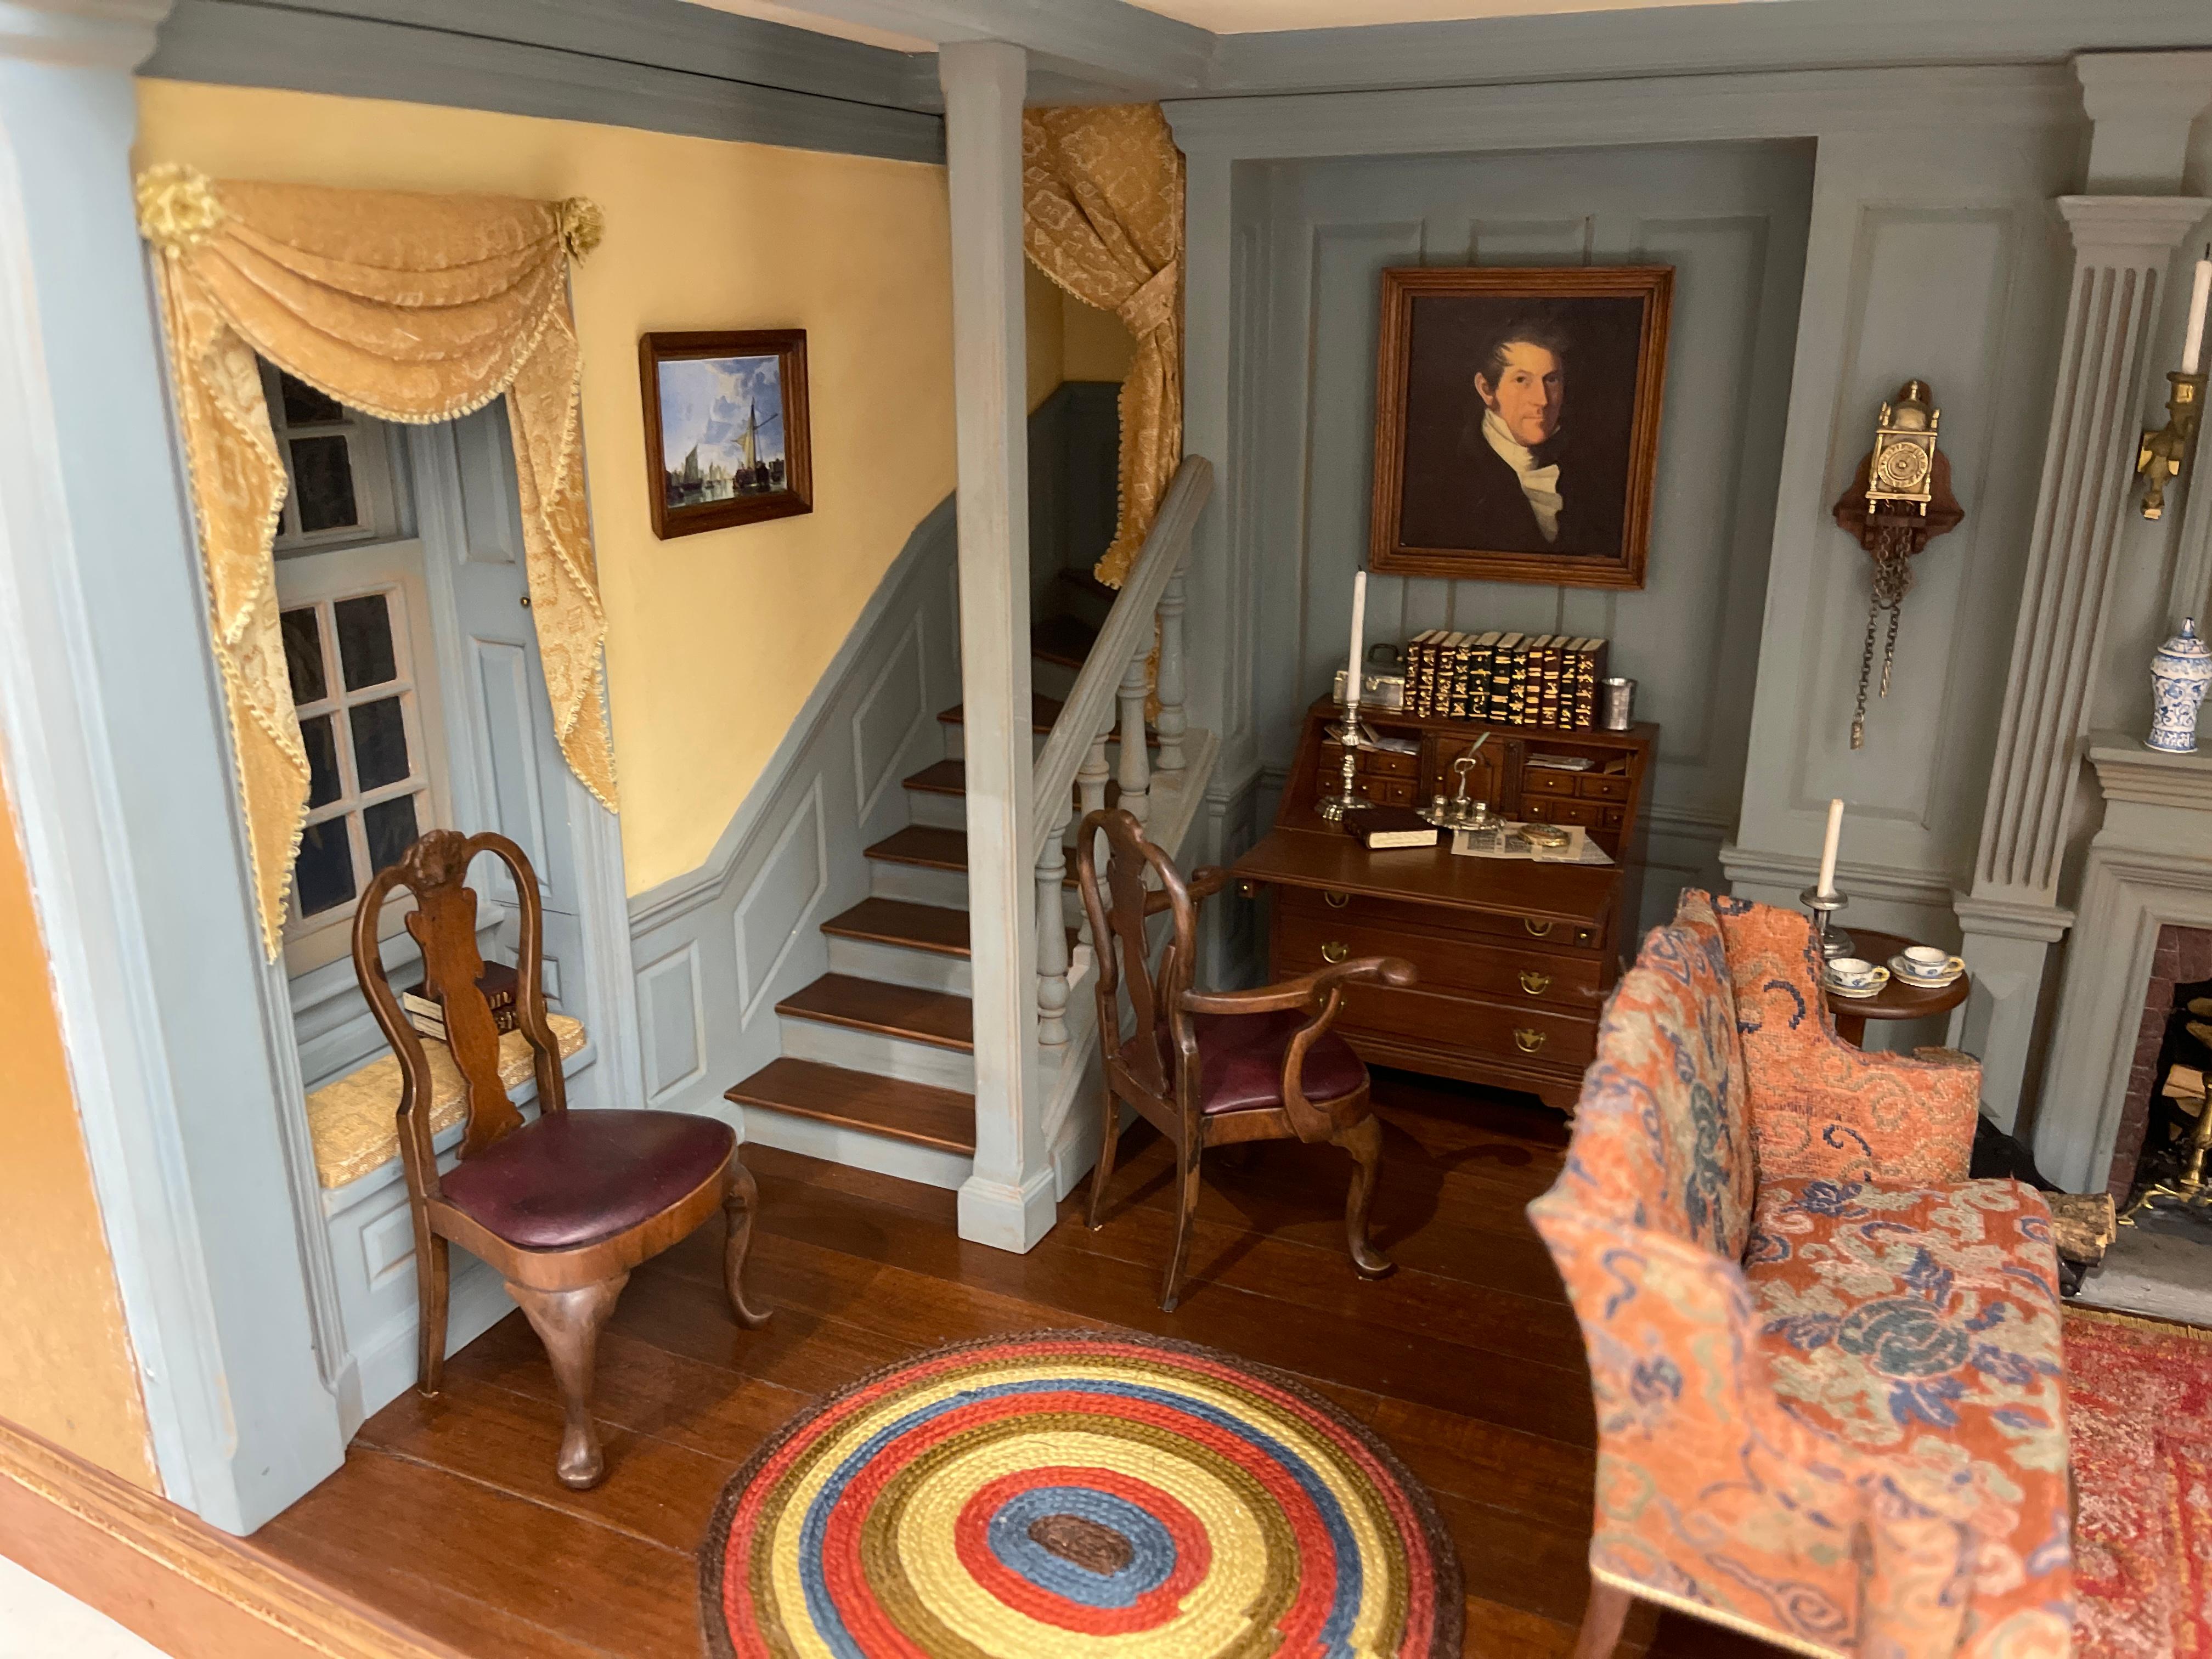 Late Colonial Sitting Room, Boston MA, 1760 - Miniature Room by Kupjack Studios For Sale 1